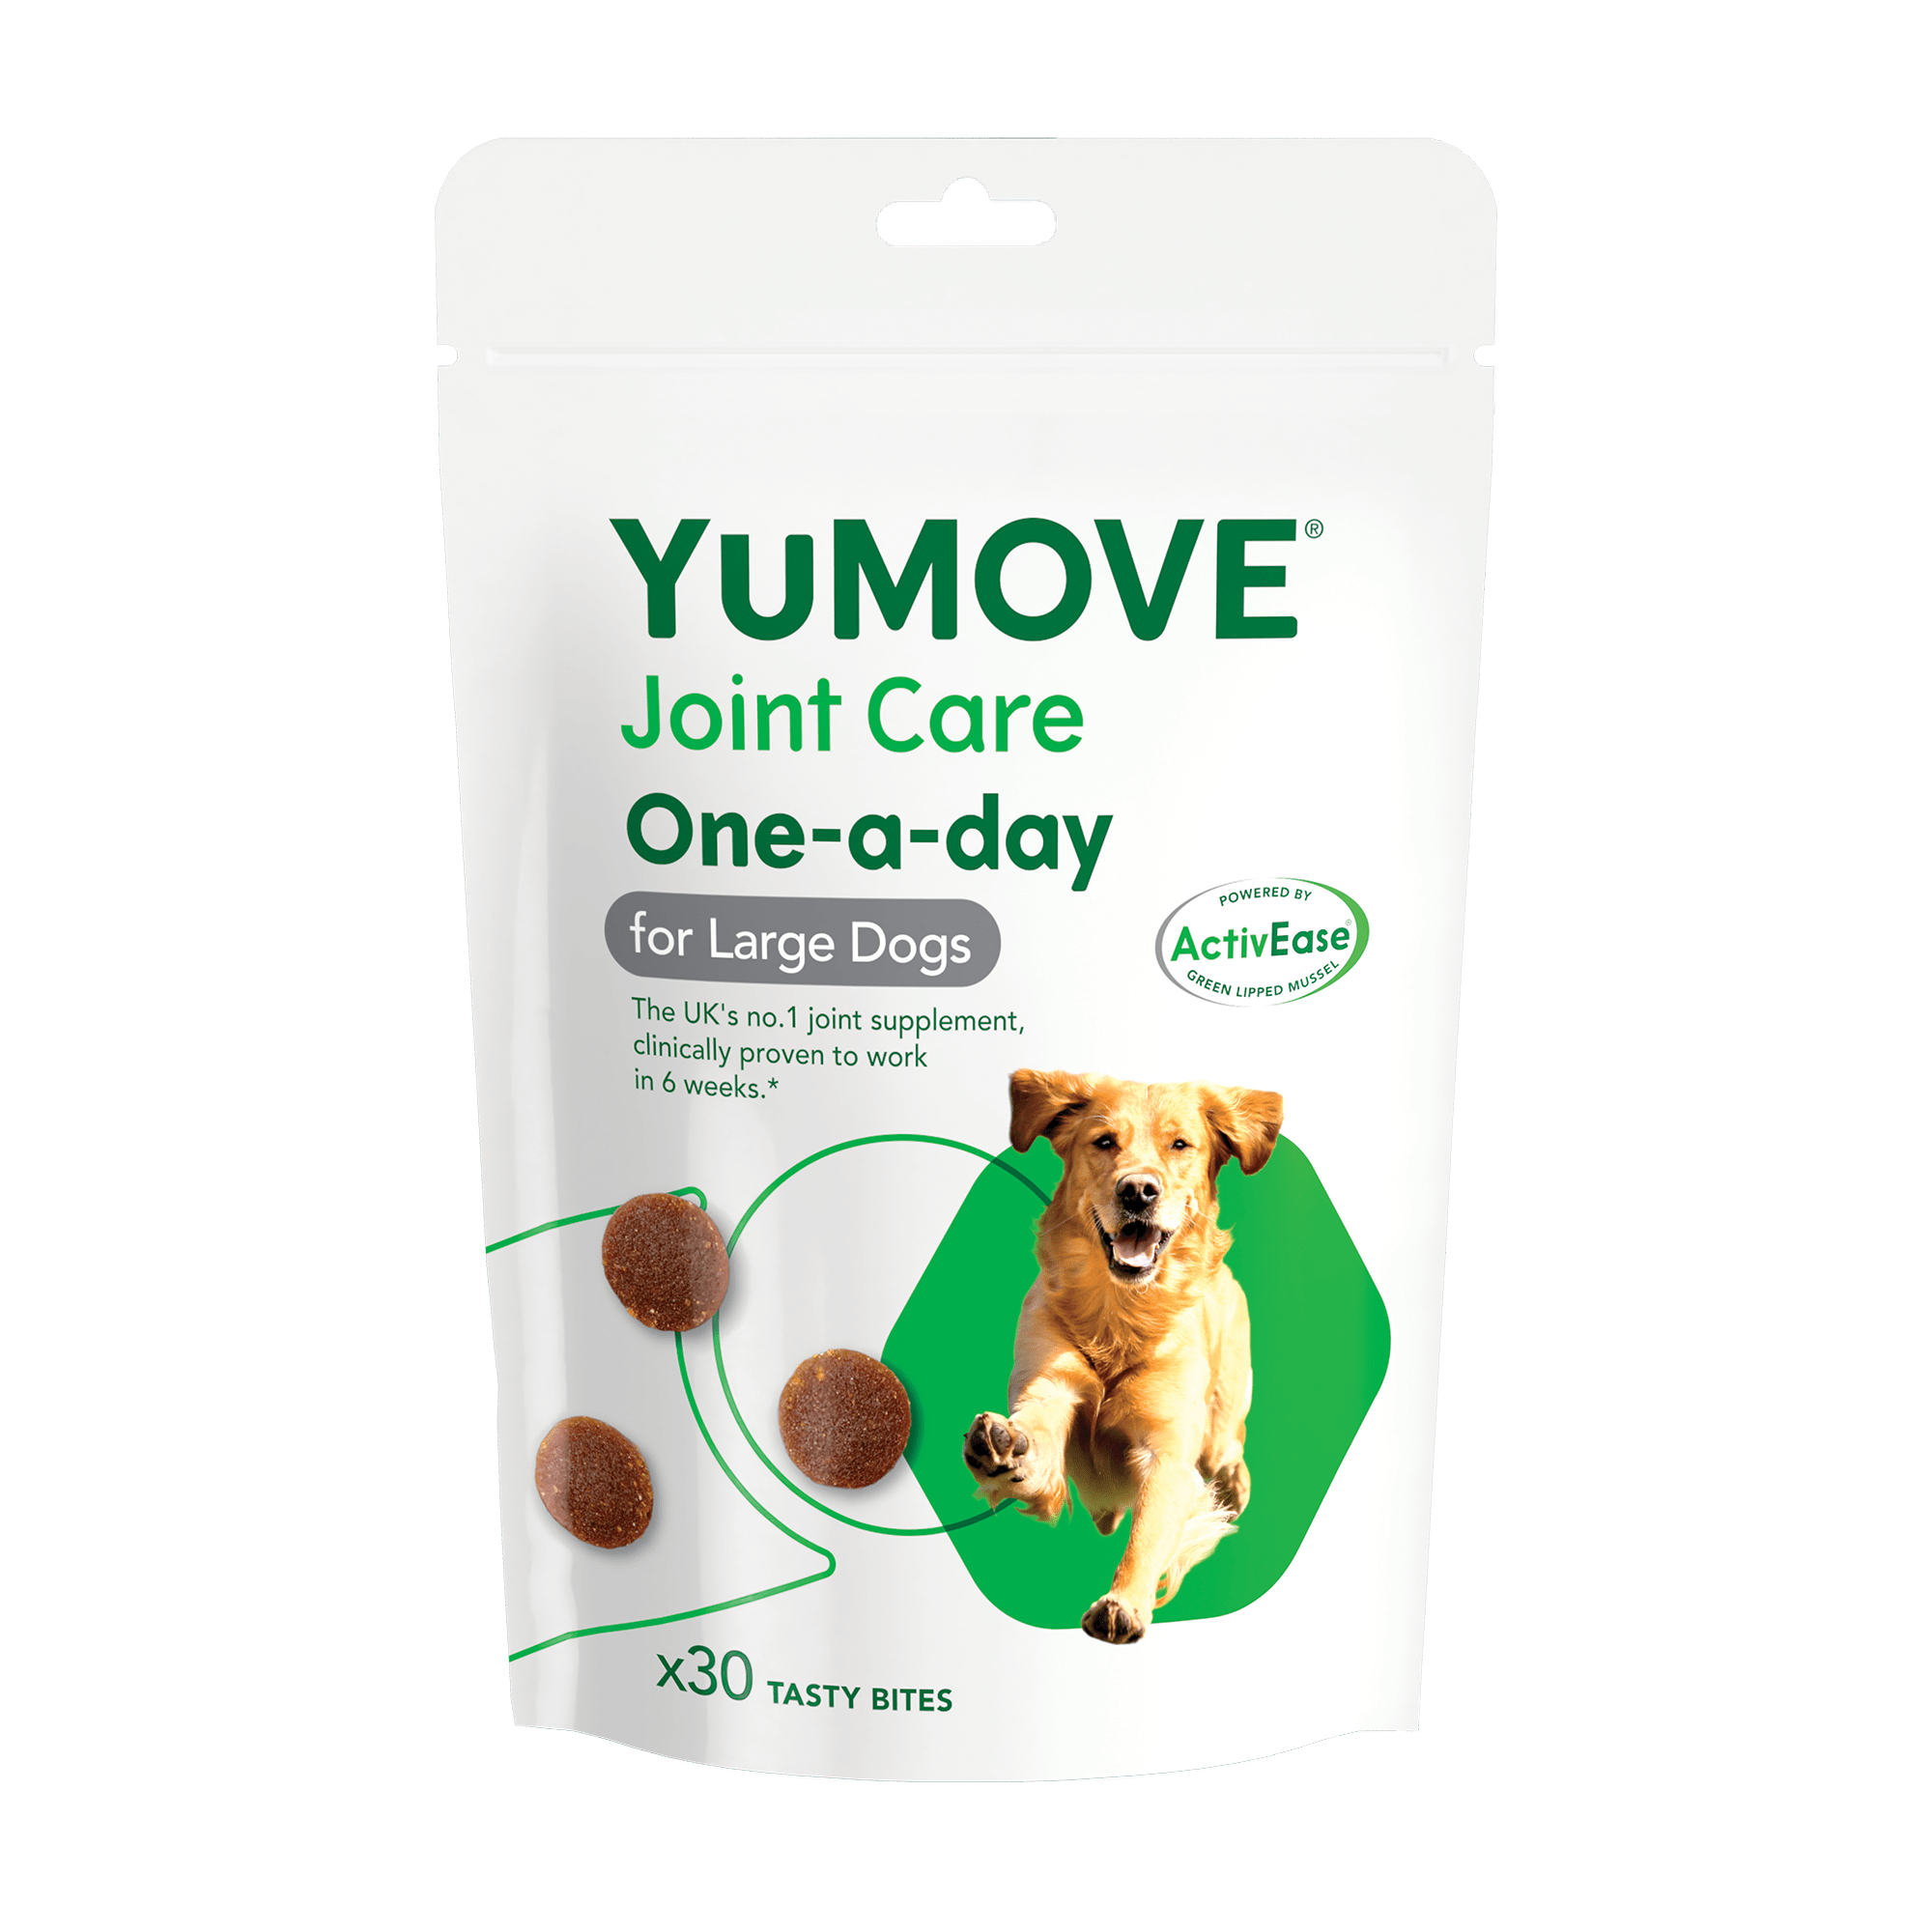 Joint Care One-a-day for Dogs